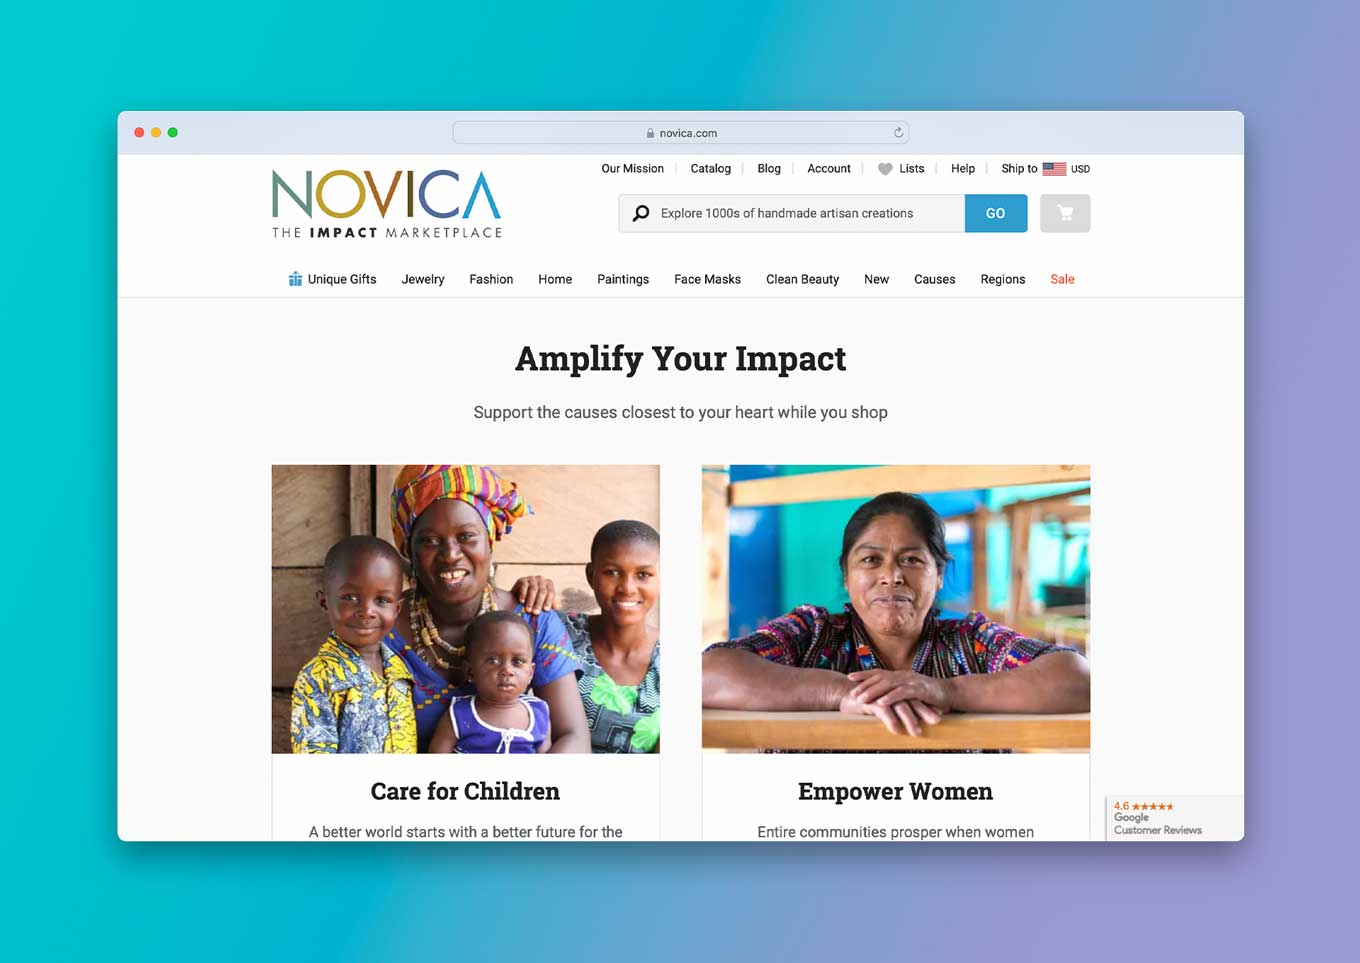 NOVICA Website: "The Impact Marketplace" and "Amplify Your Impact: Support the causes closest to your heart while you shop" 